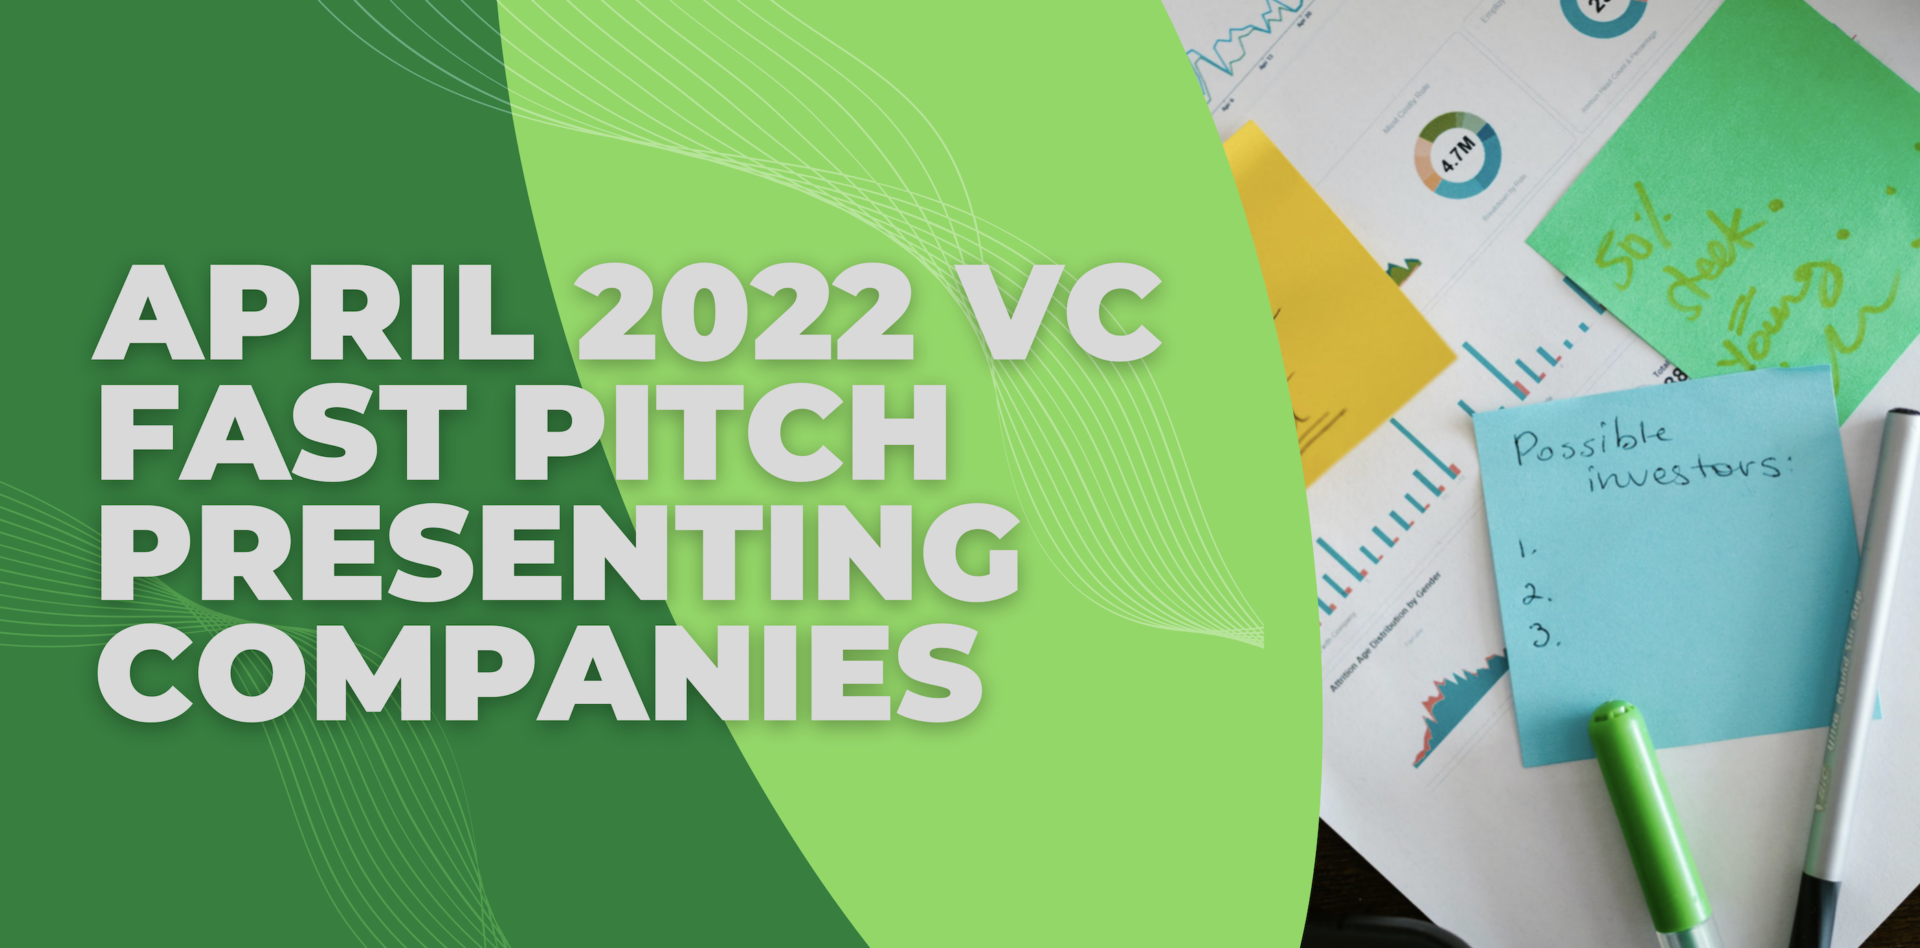 April 2022 VC Fast Pitch Presenting Companies